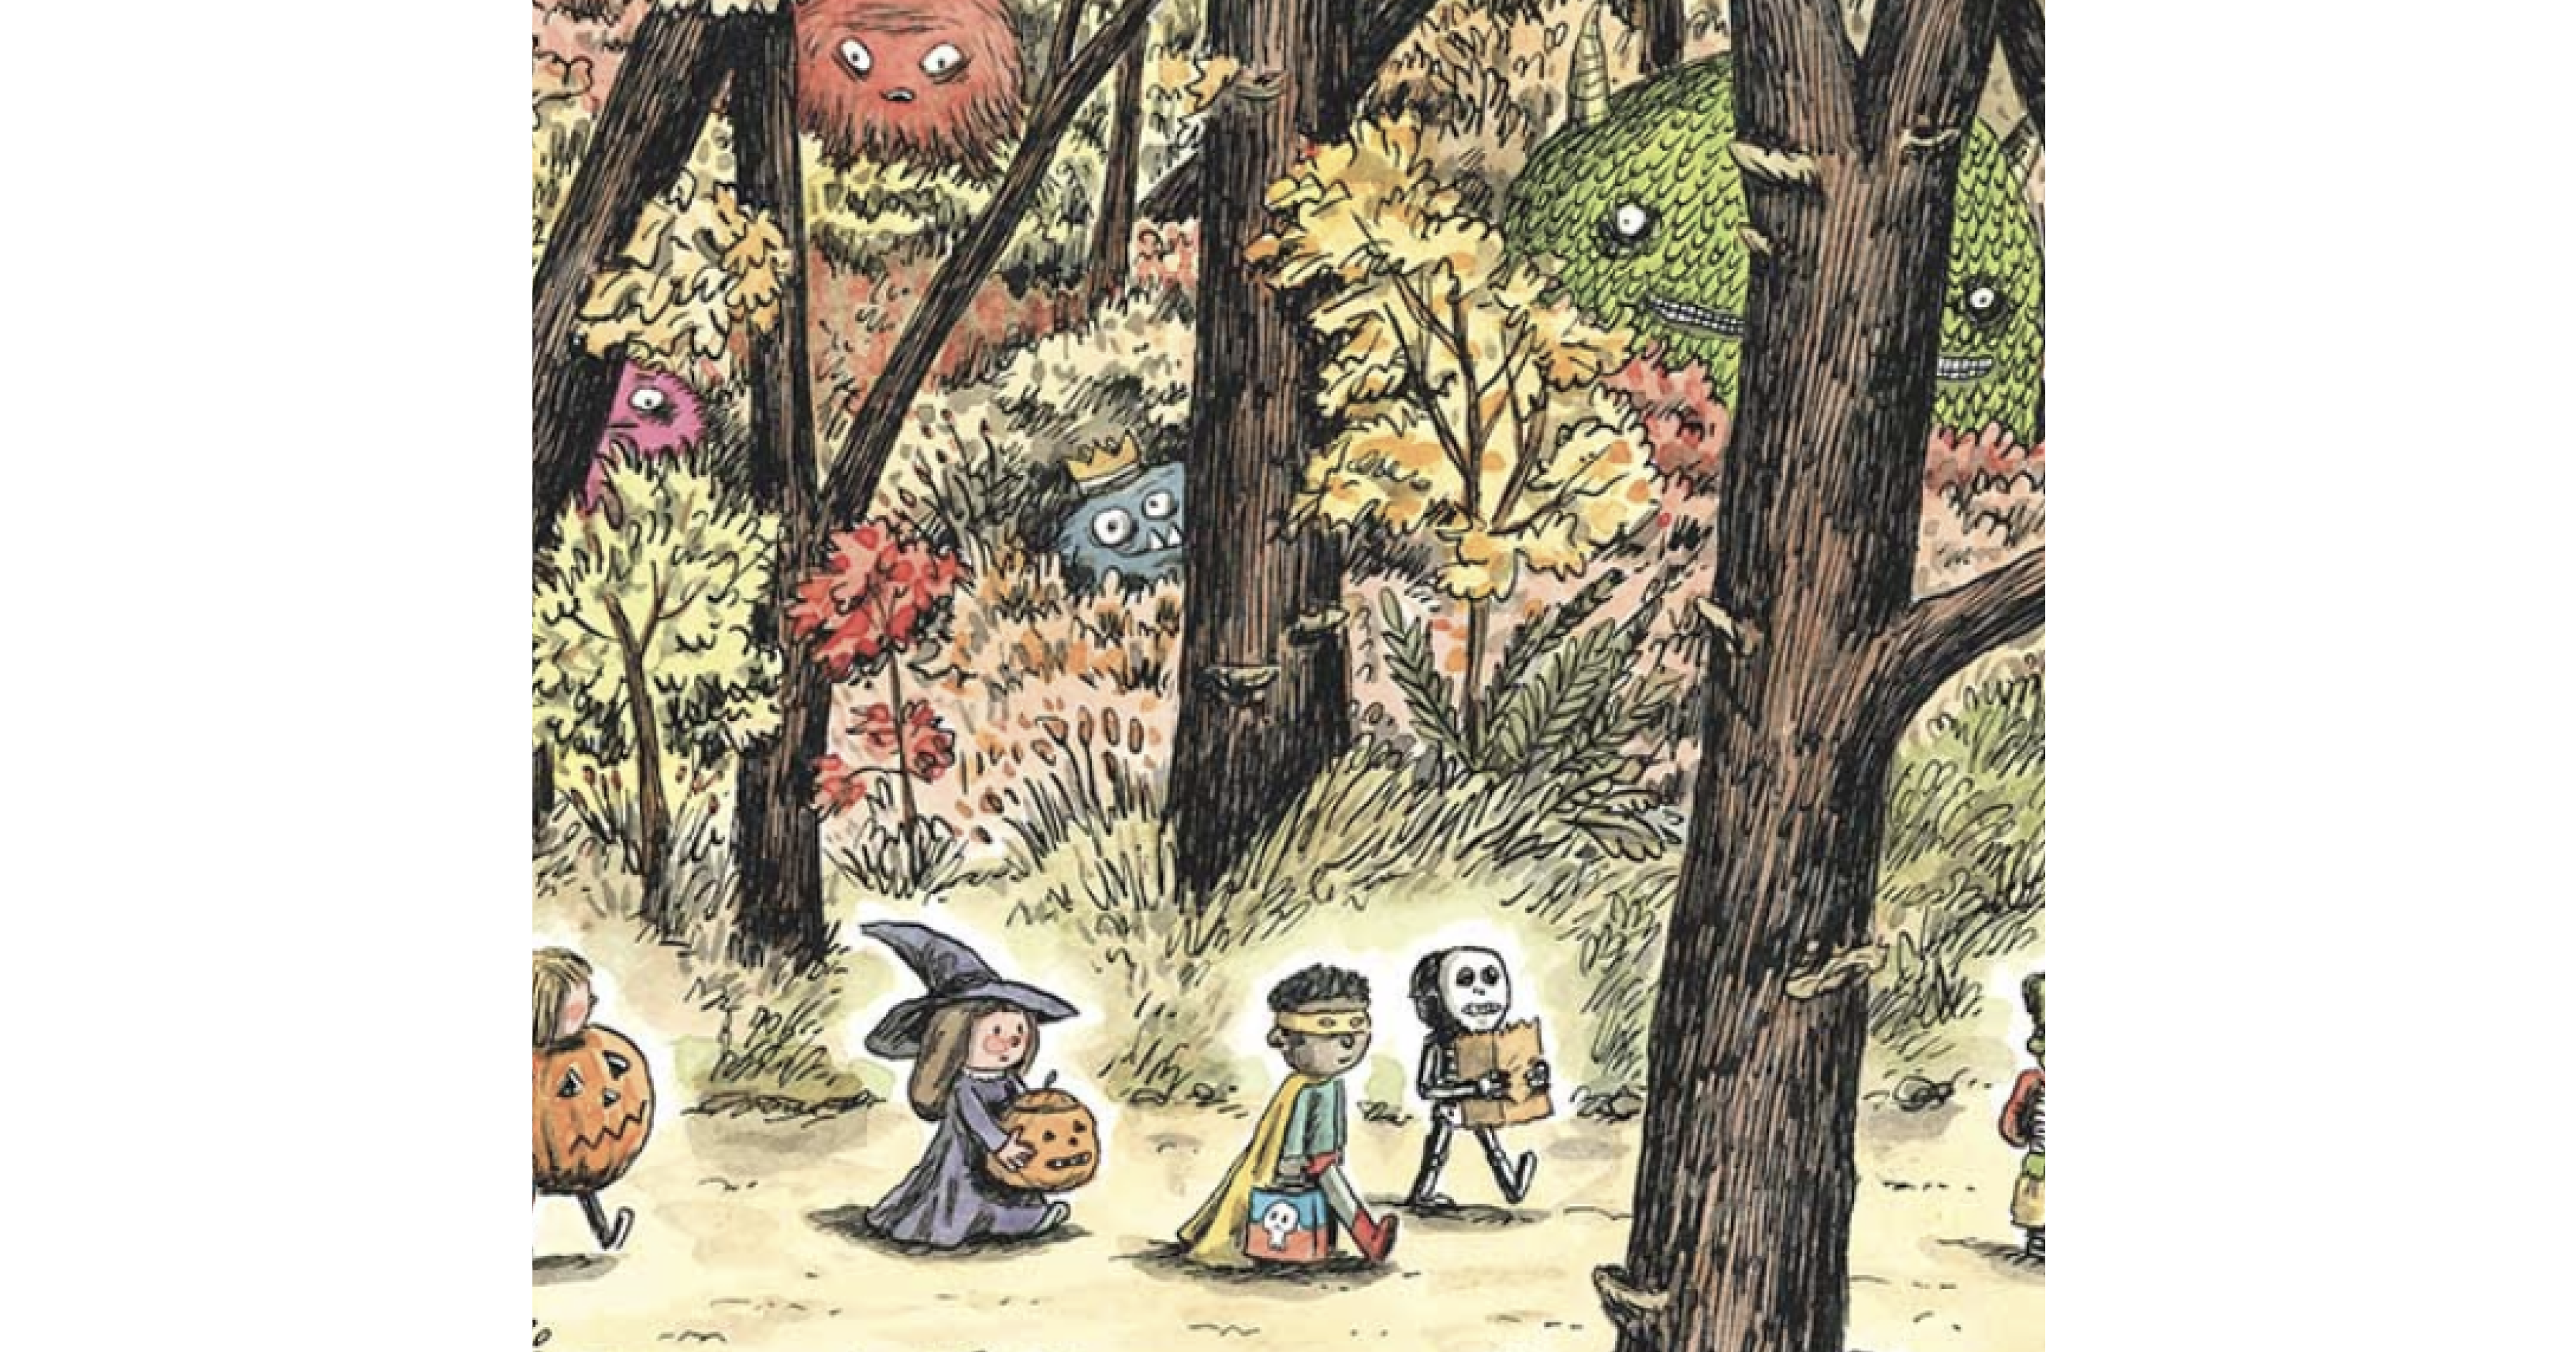 Trick-or-treaters in neat costumes walk through the woods